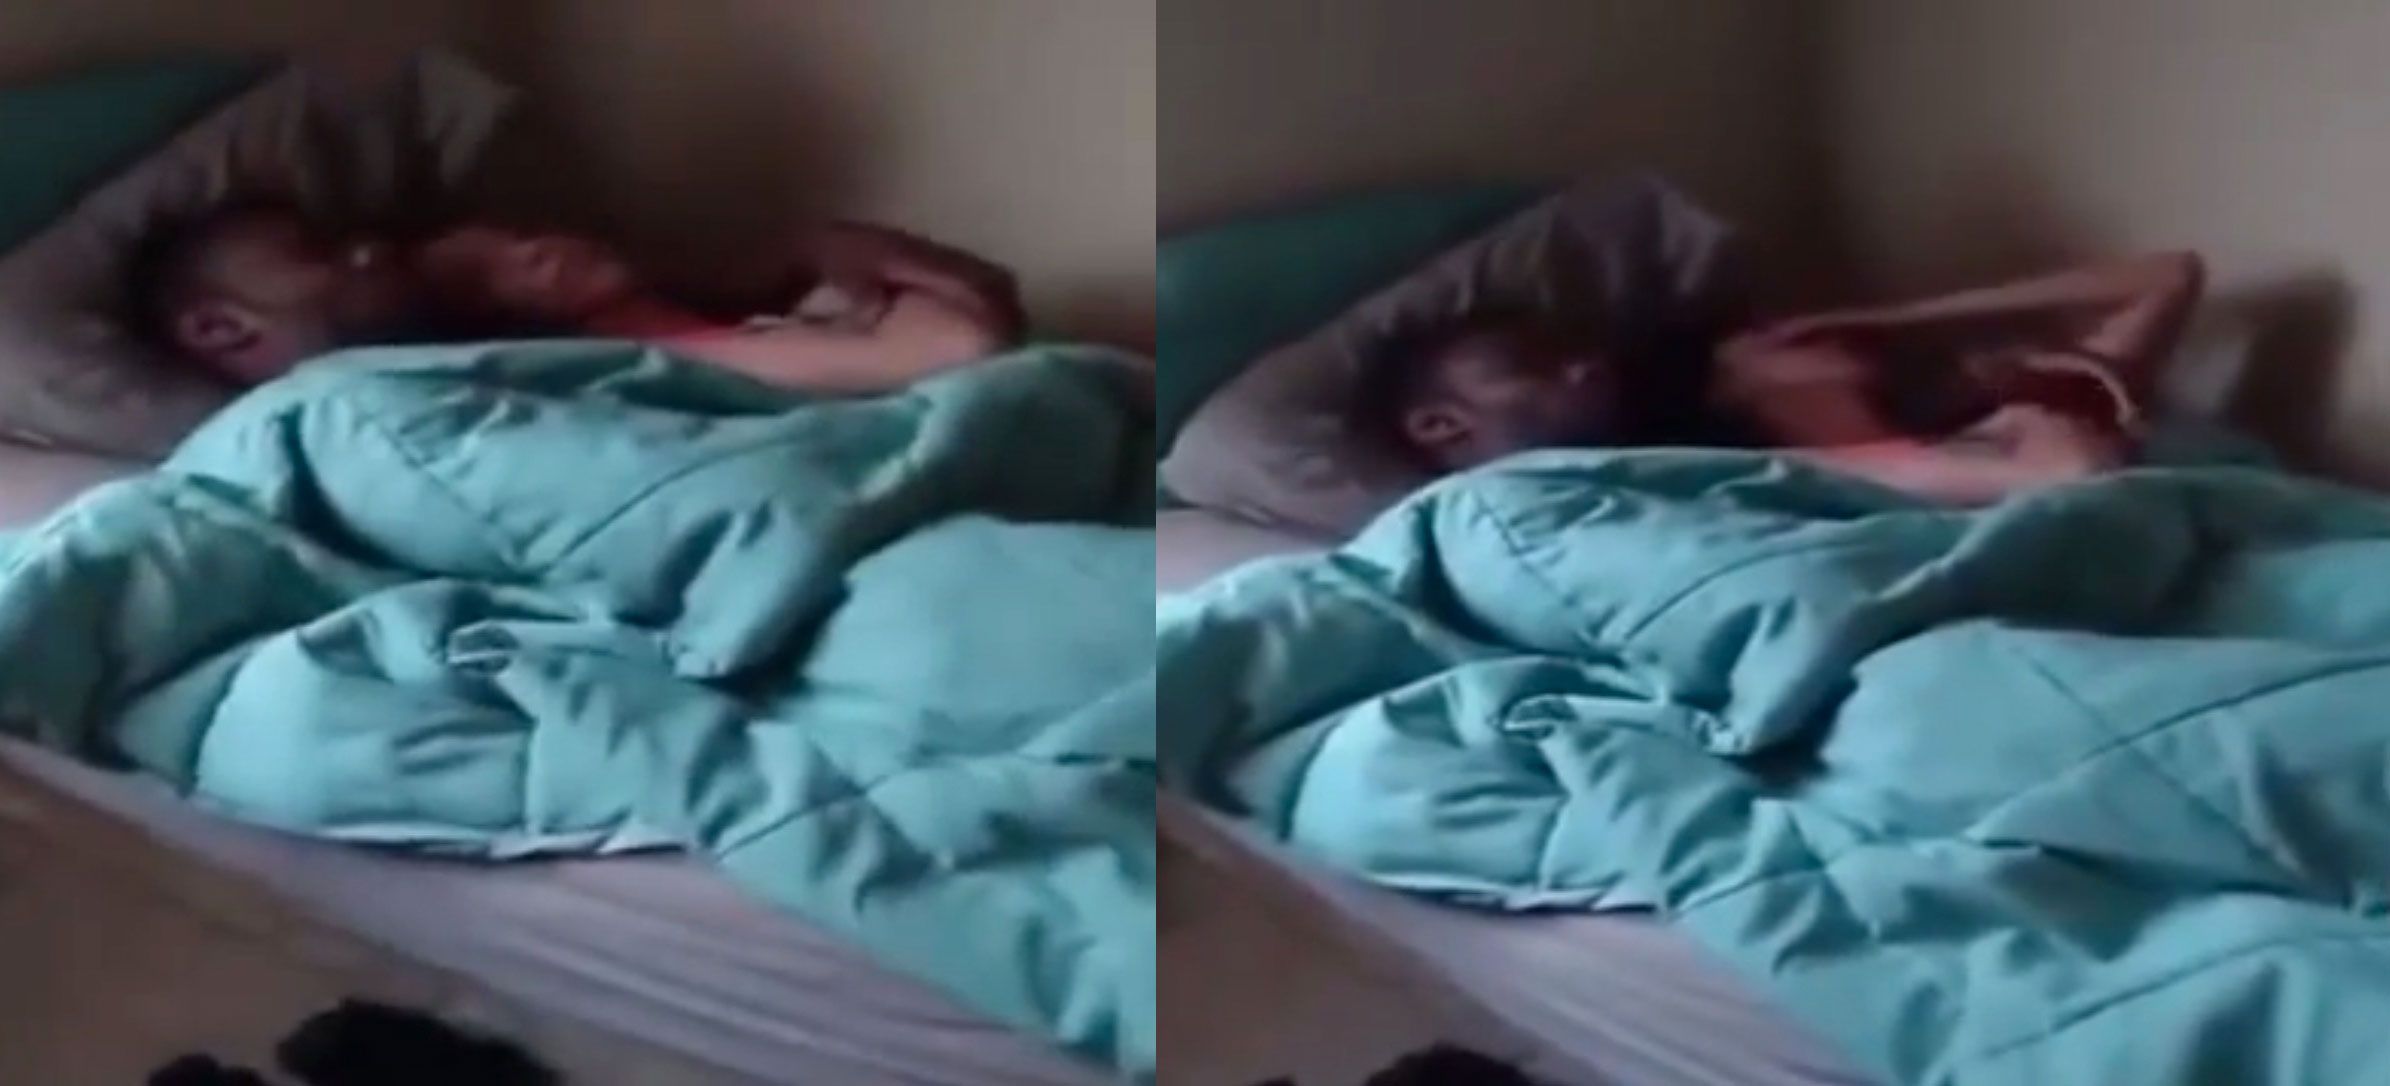 This man walked in on his girlfriend in bed with another man and filmed the whole thing